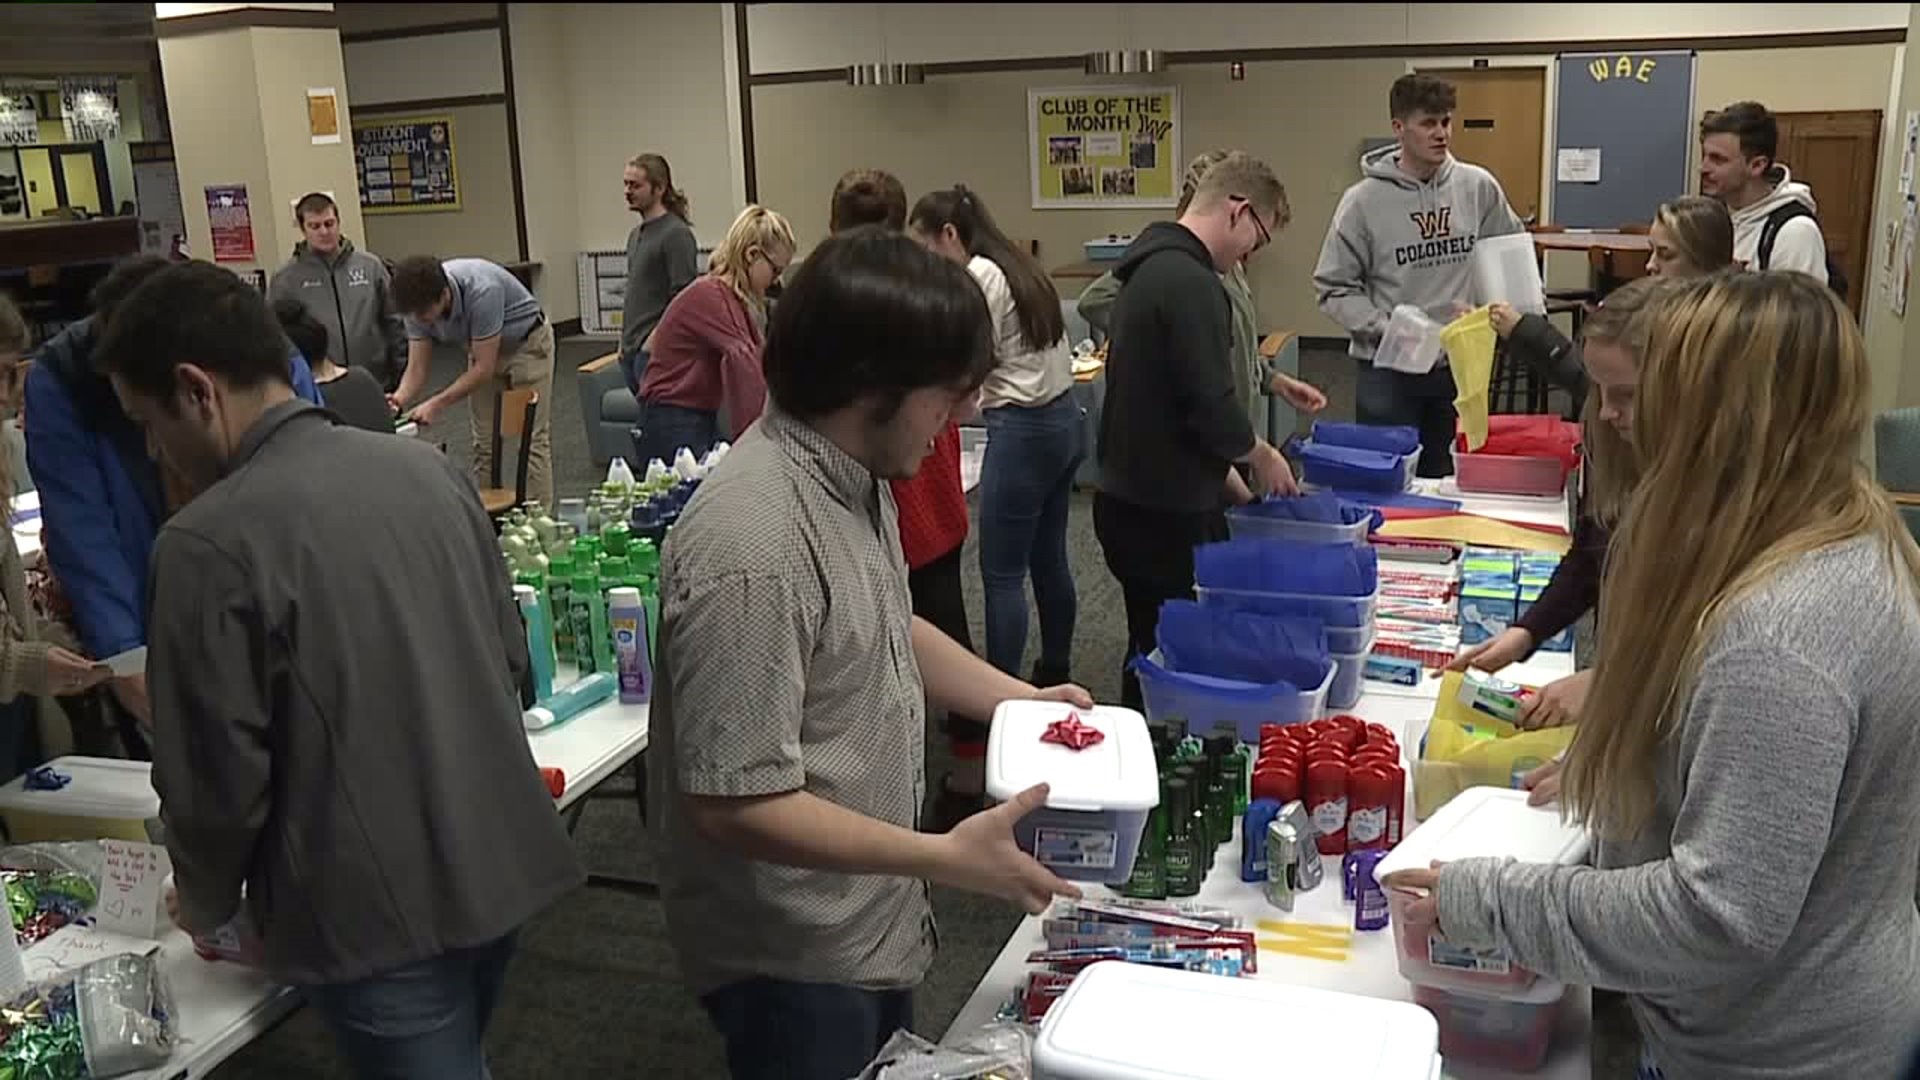 Wilkes University Students Put Together Care Packages for Veterans